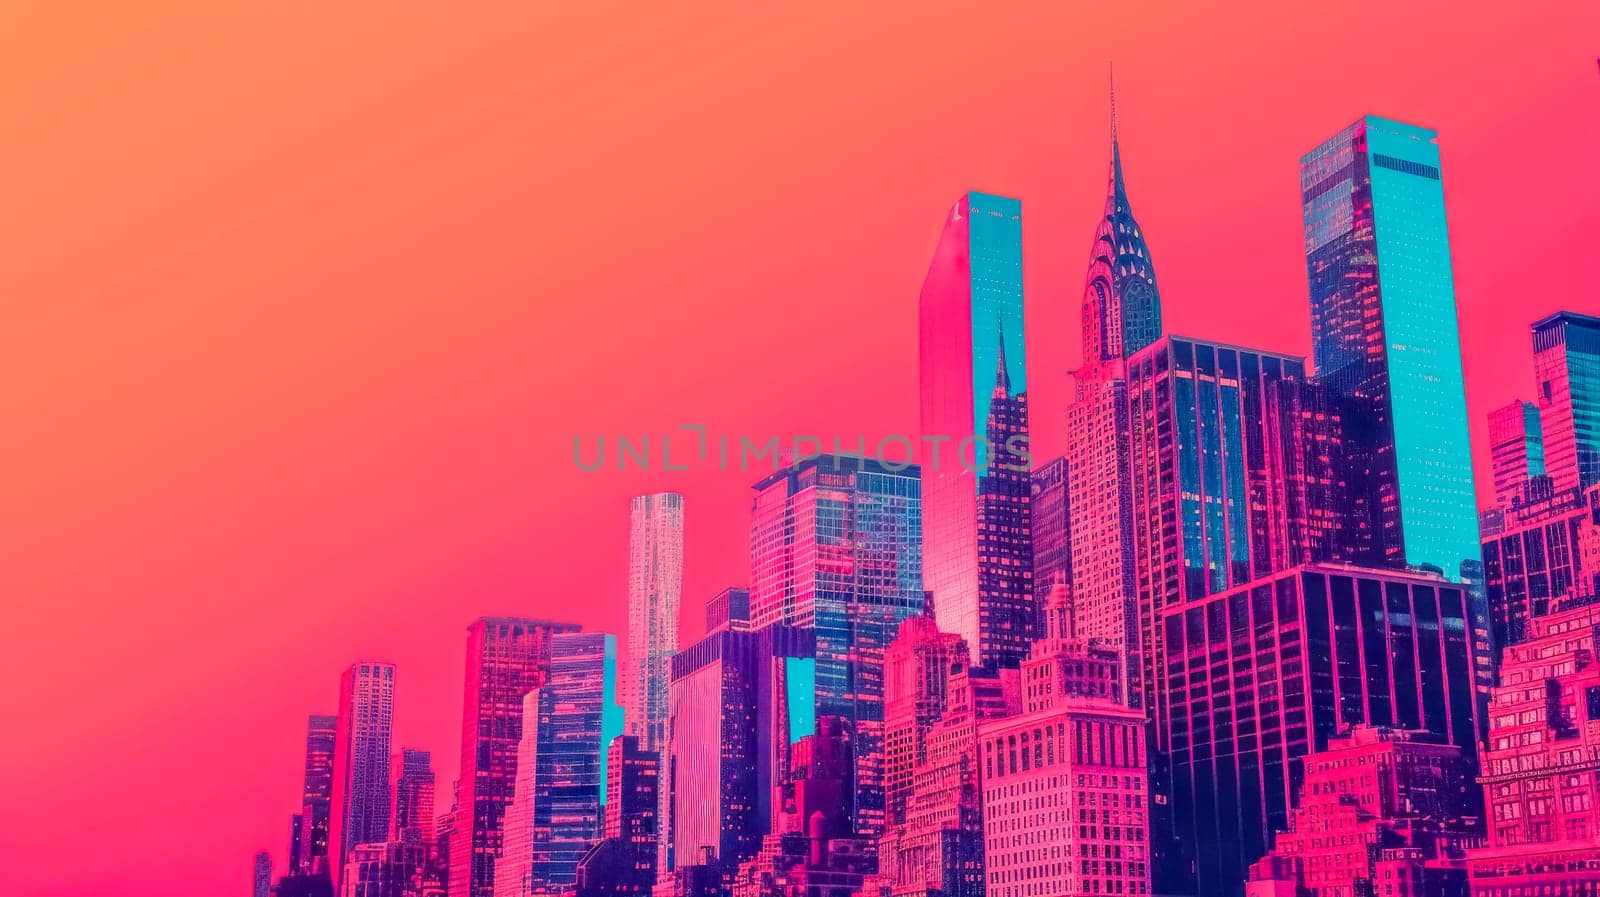 The new york city skyline stands out with a striking pink and orange gradient background at dusk